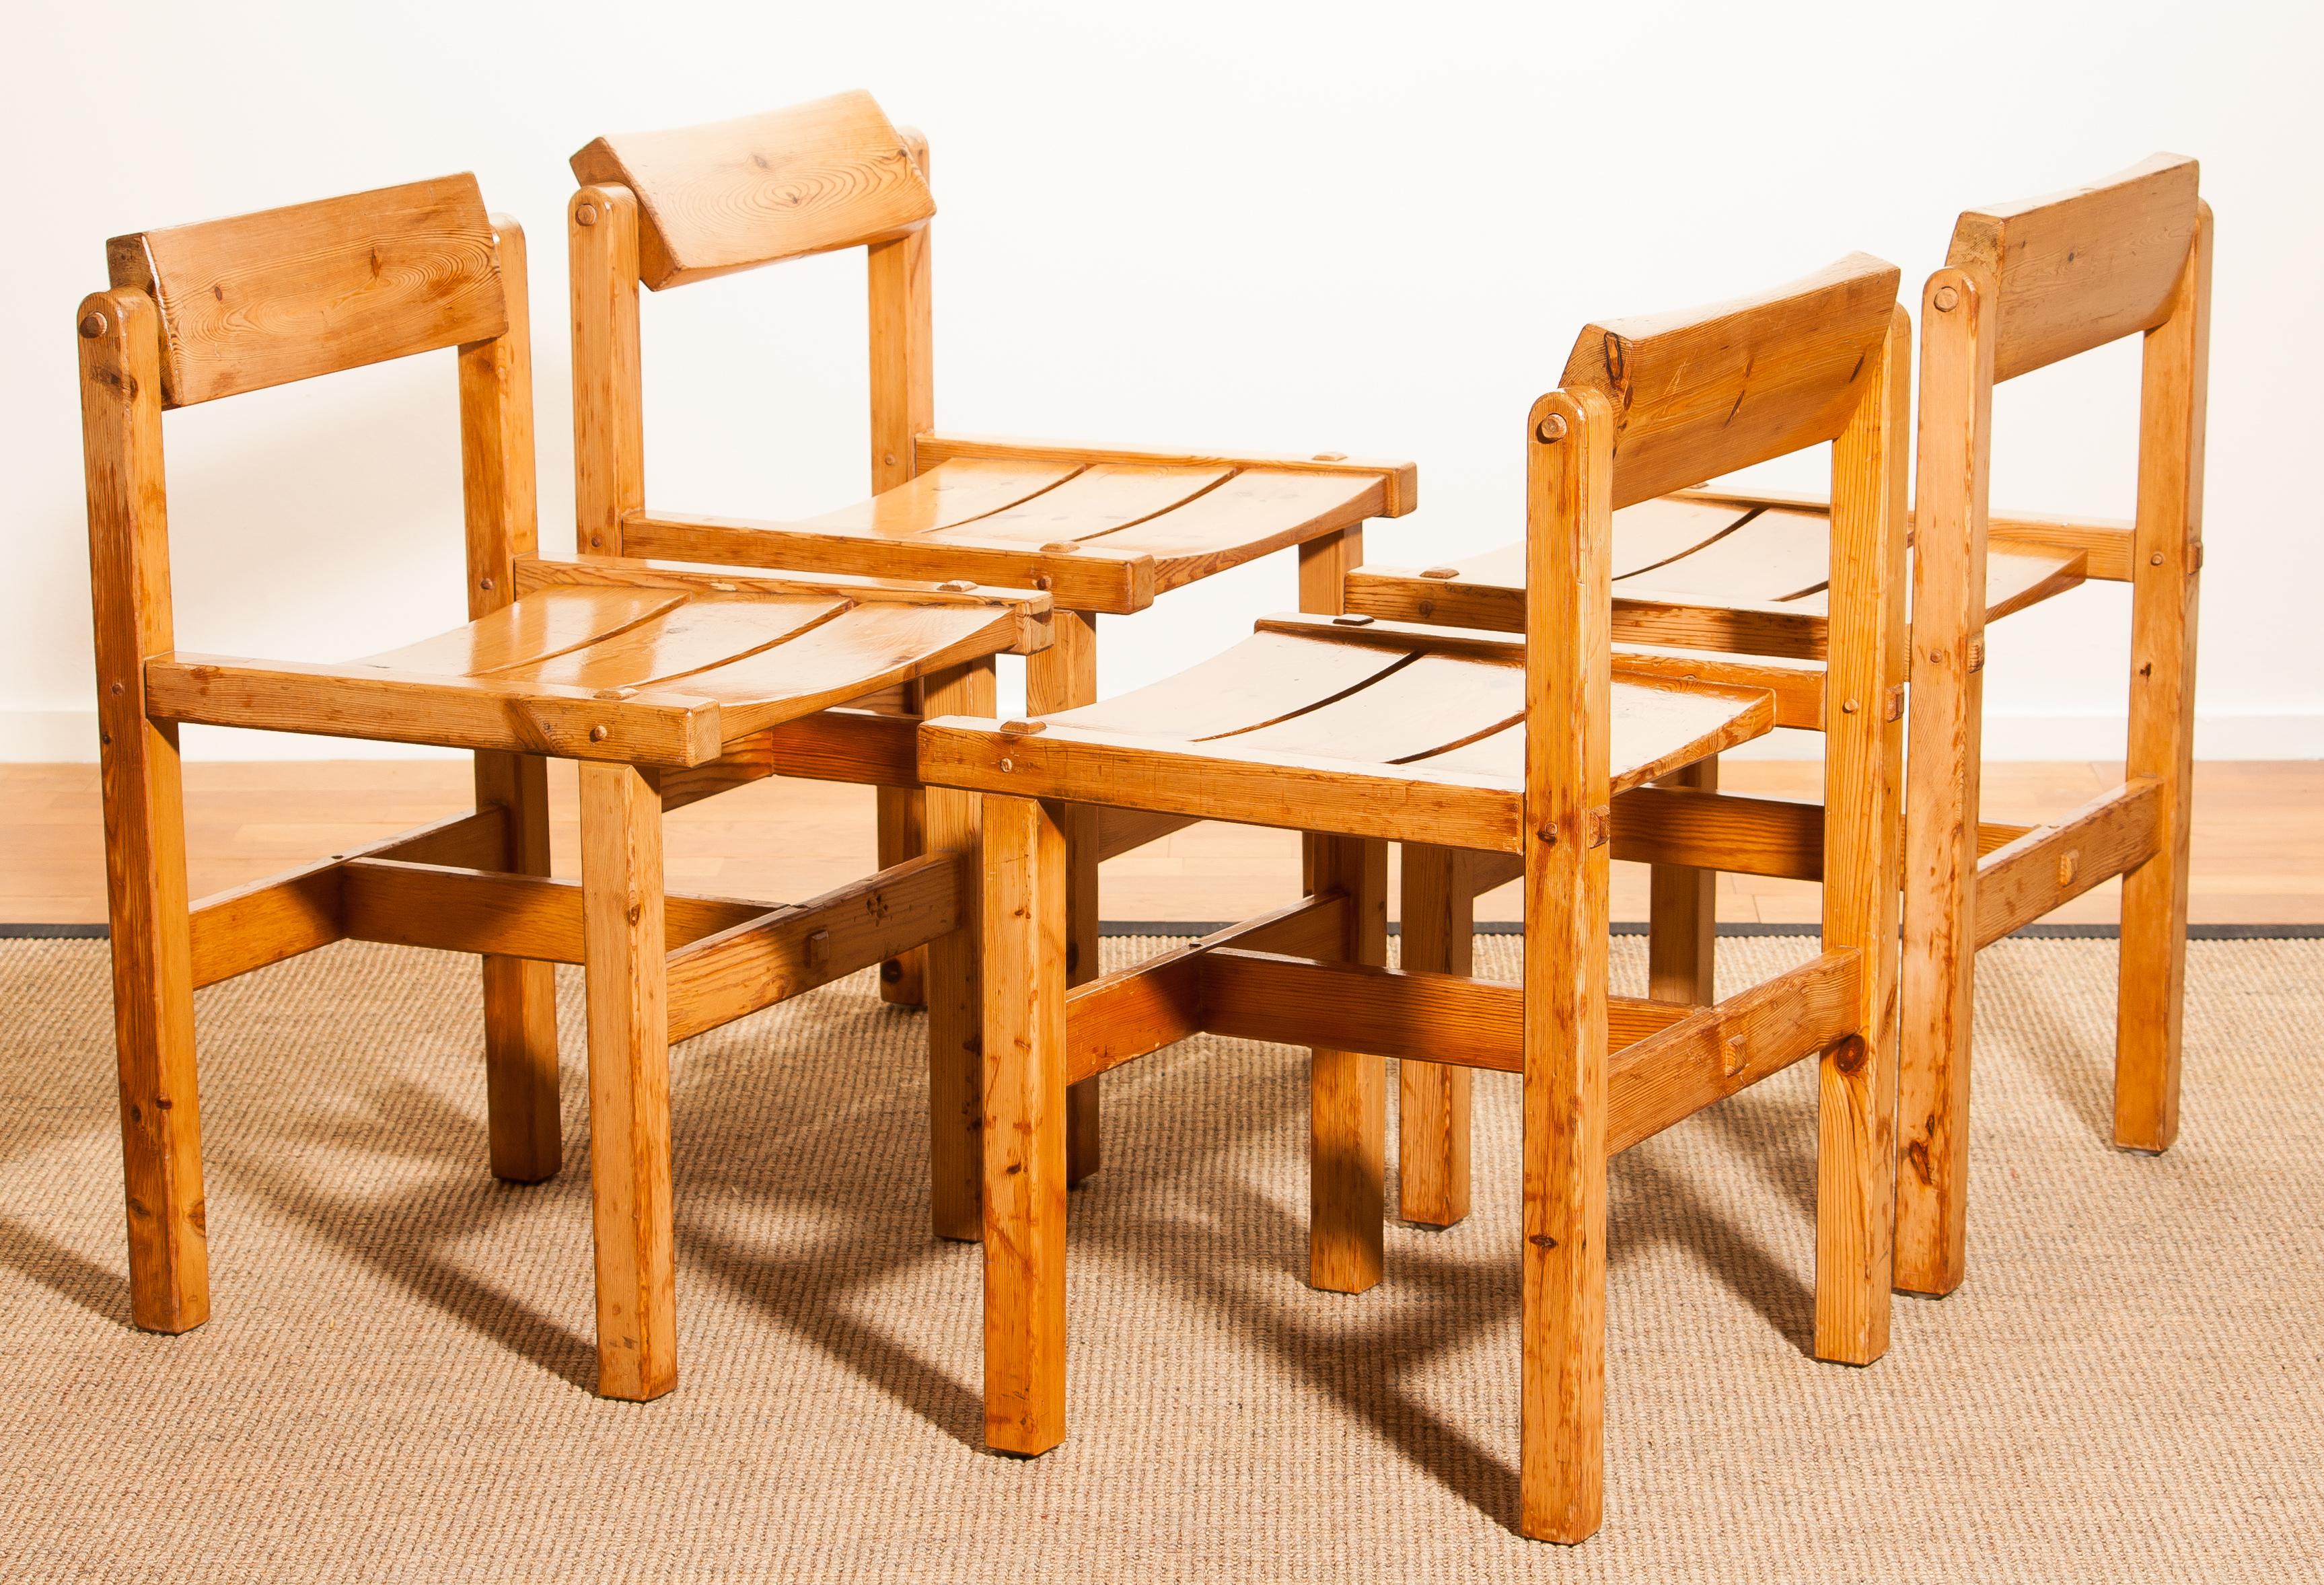 Very nice set of four chairs designed by Edvin Helseth.
These chairs are made of pine and they have turnable backrests.
They are in a beautiful used condition.
Period 1960s.
Dimensions: H 74 cm, W 47 cm, D 41 cm, SH 47 cm.